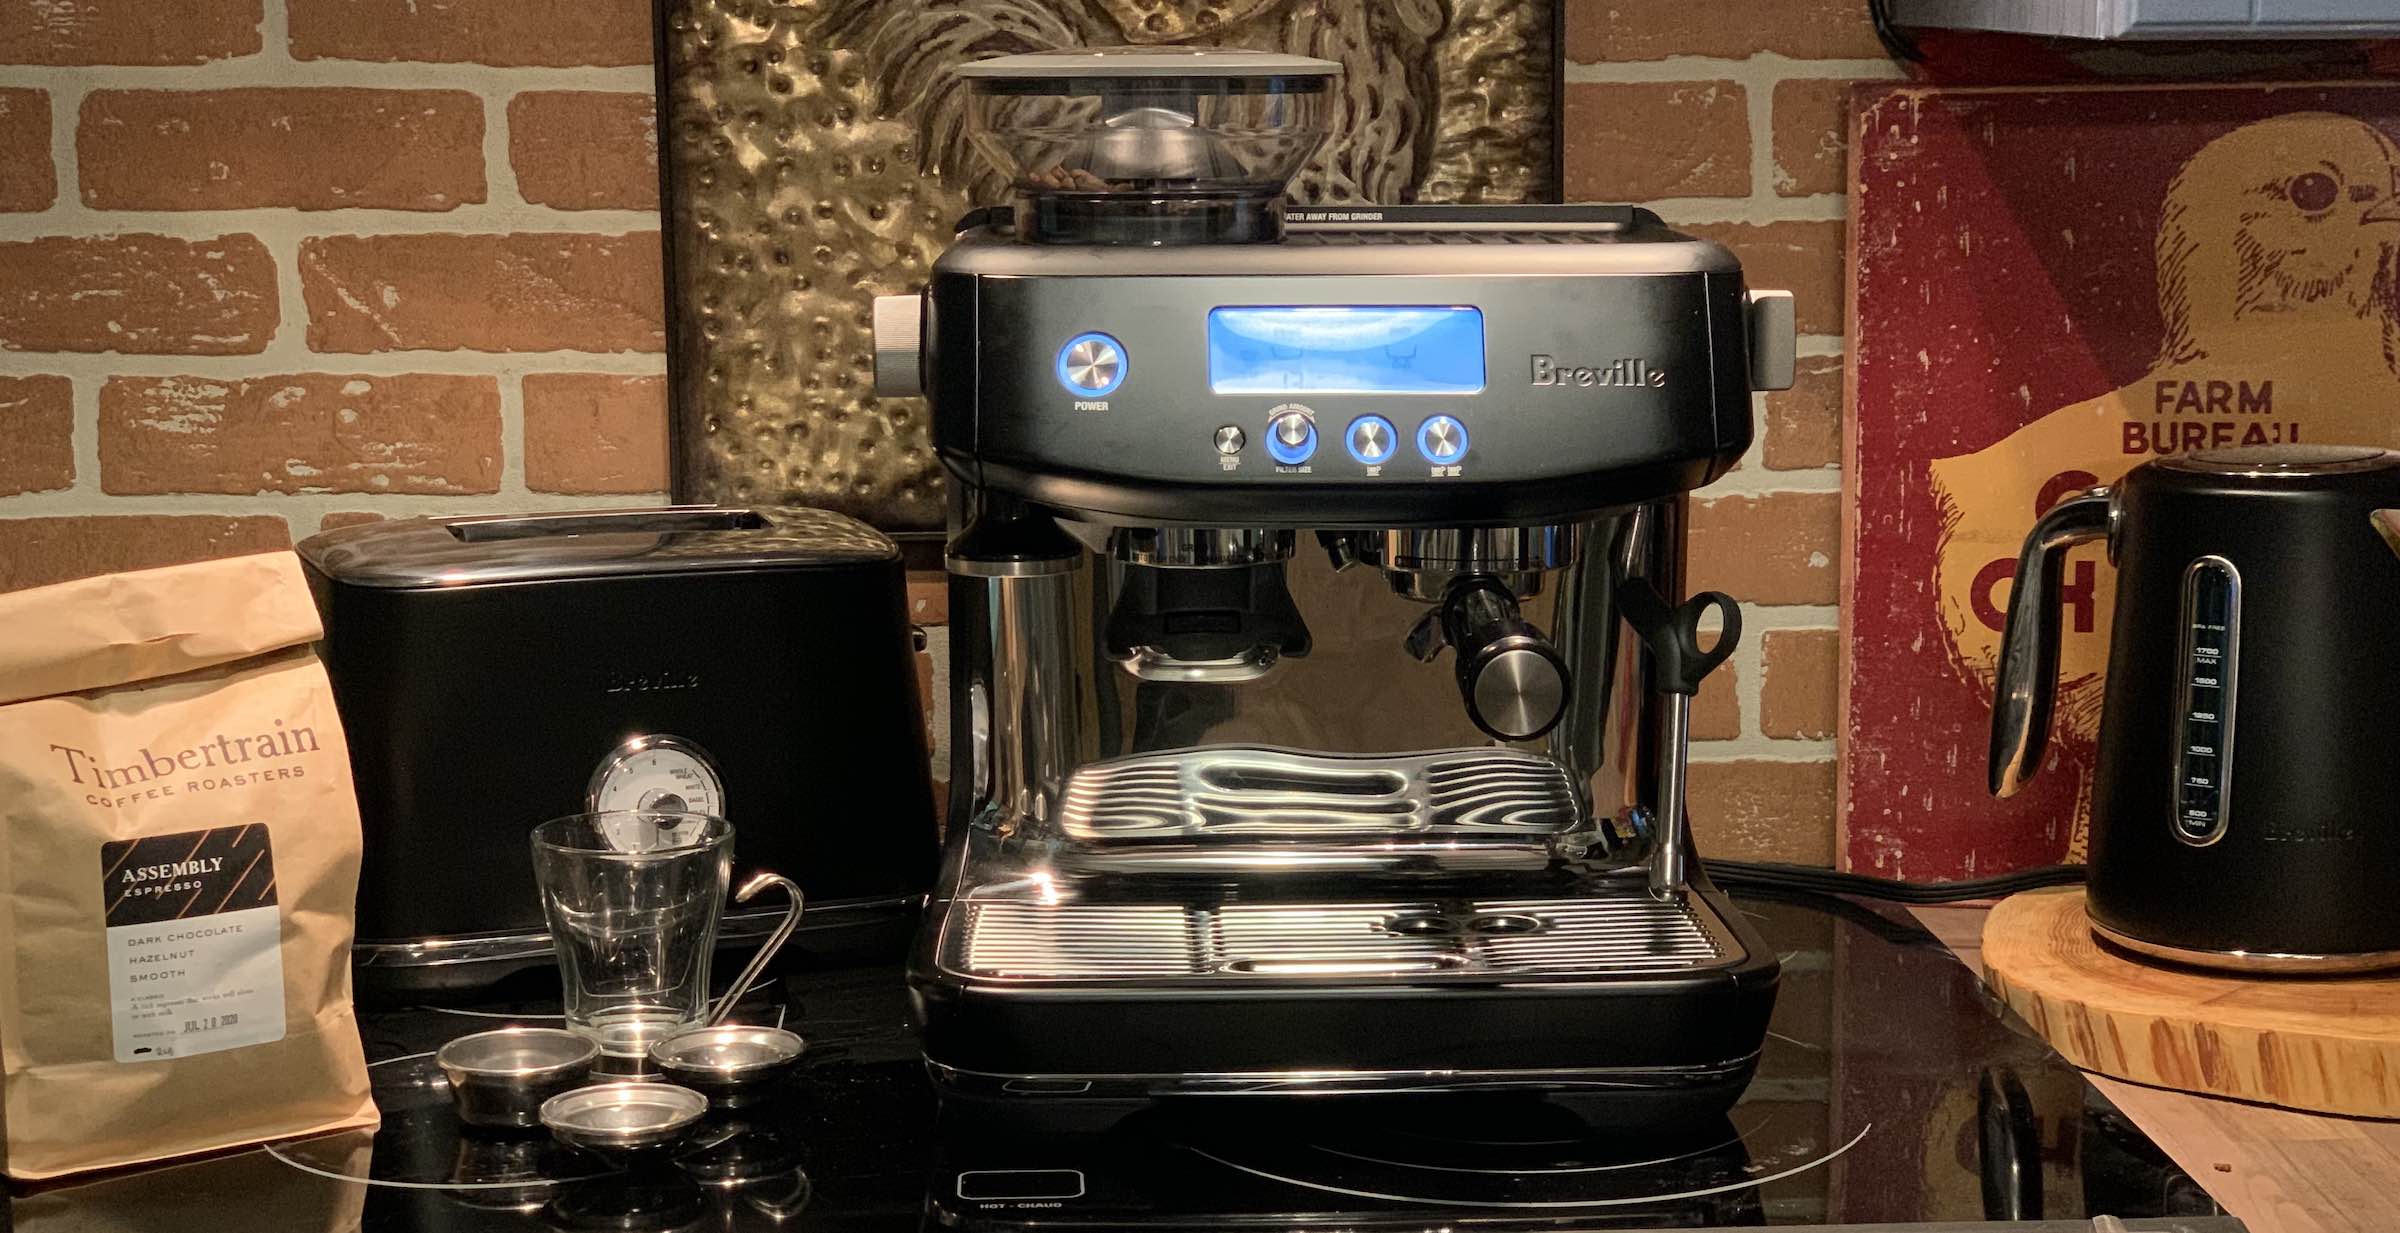 How to Program a Shot on the Breville Barista Pro 